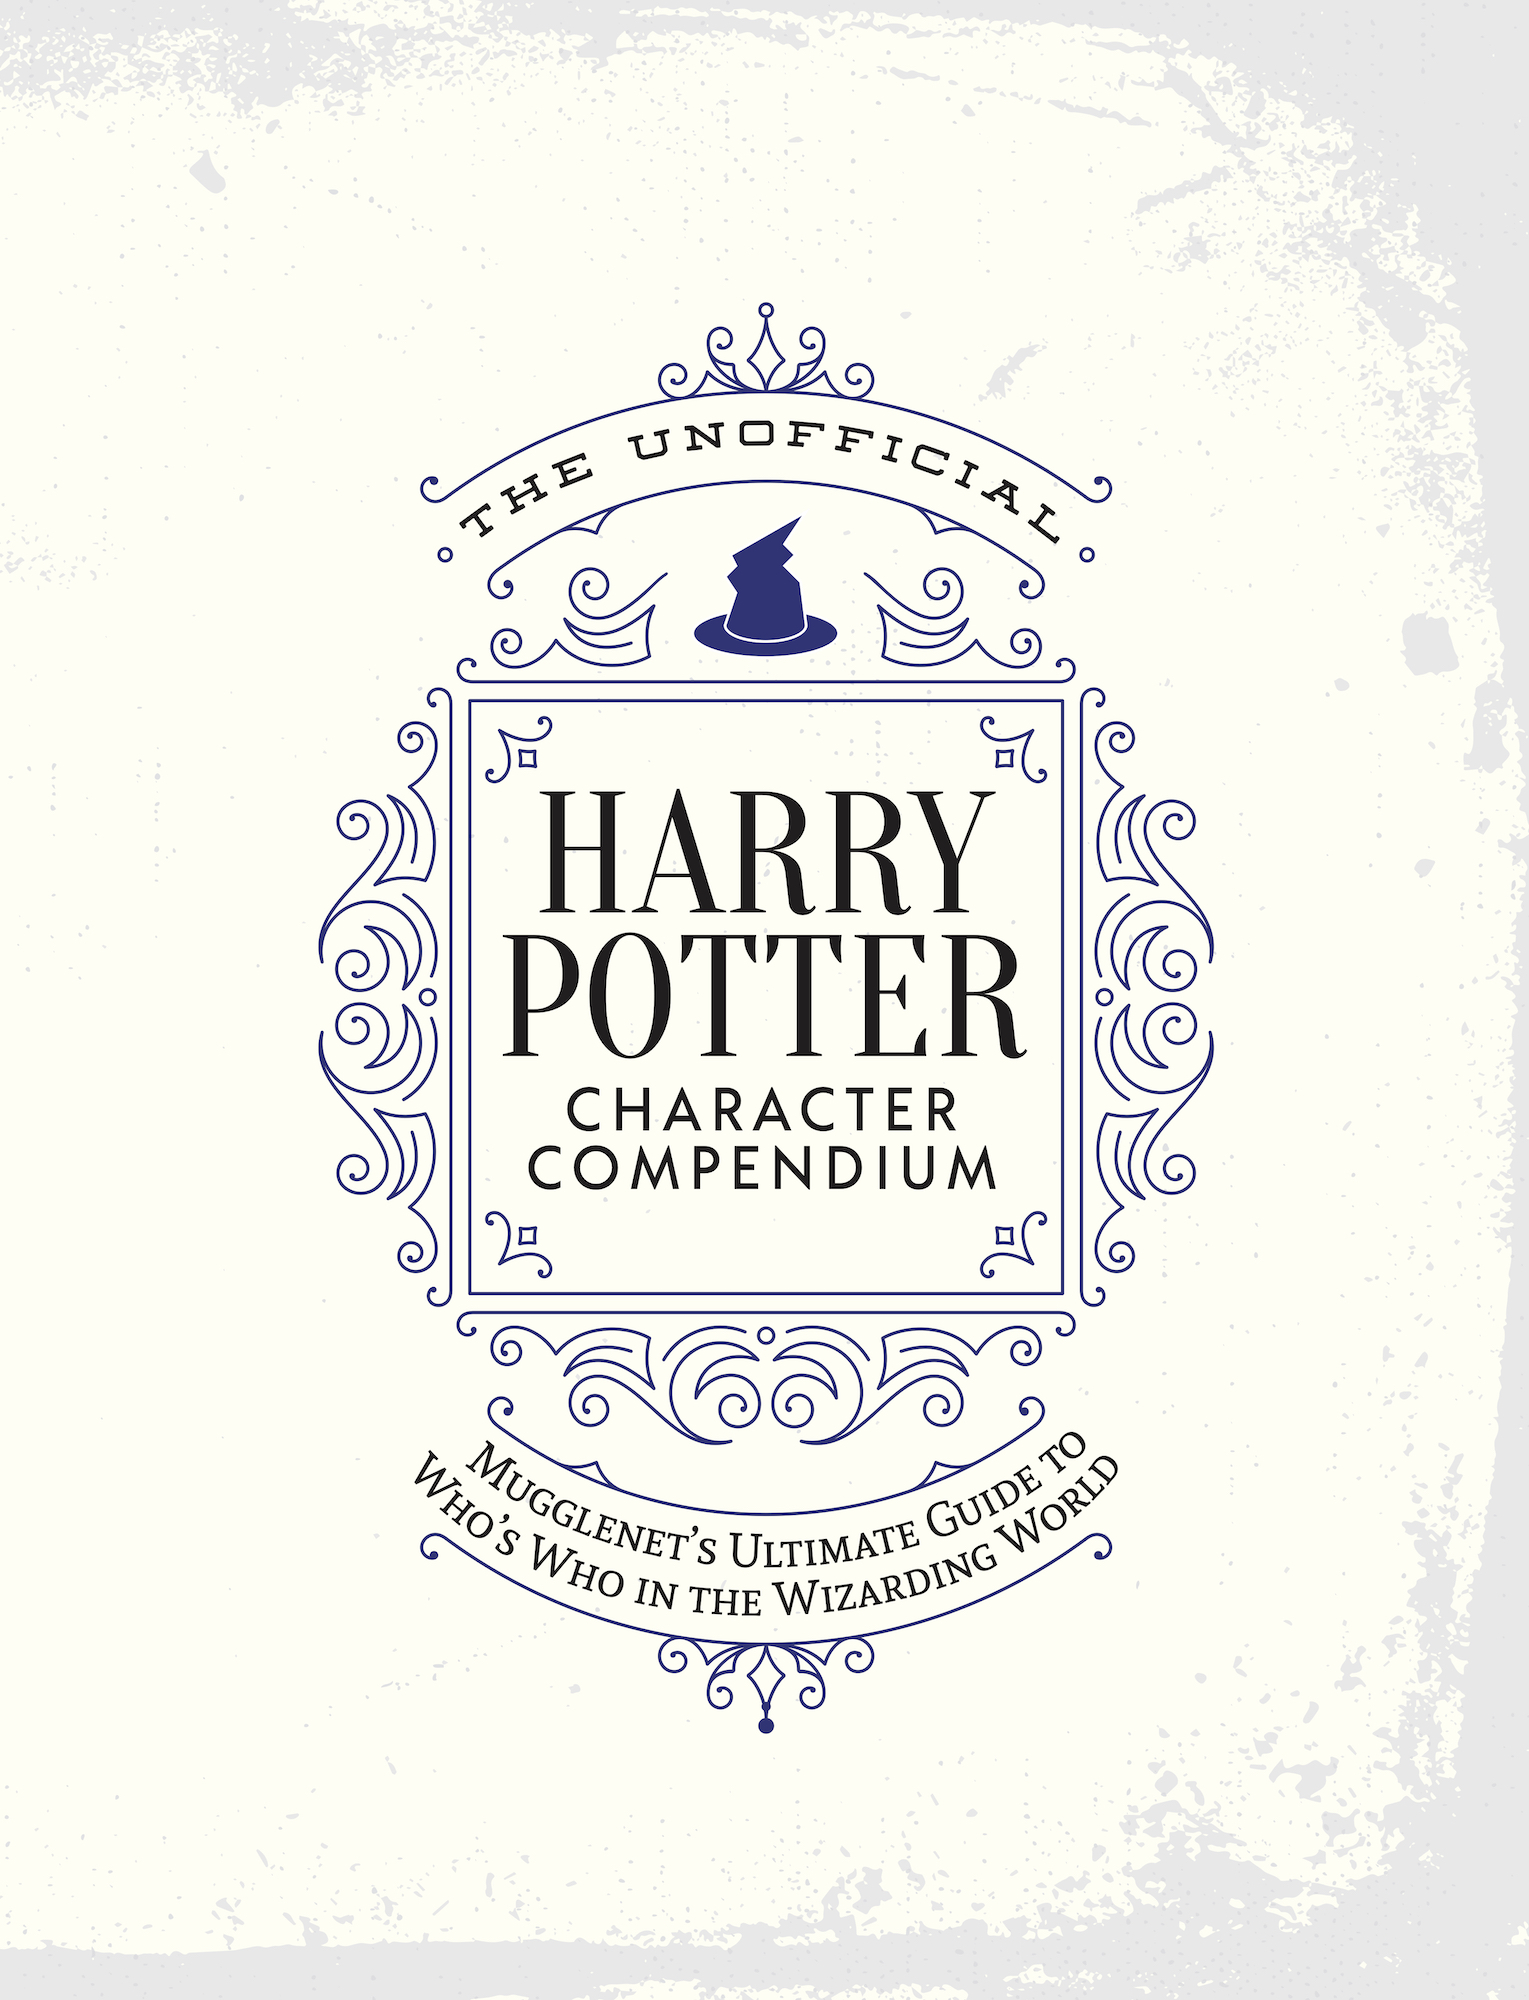 “The Unofficial Harry Potter Character Compendium” title page